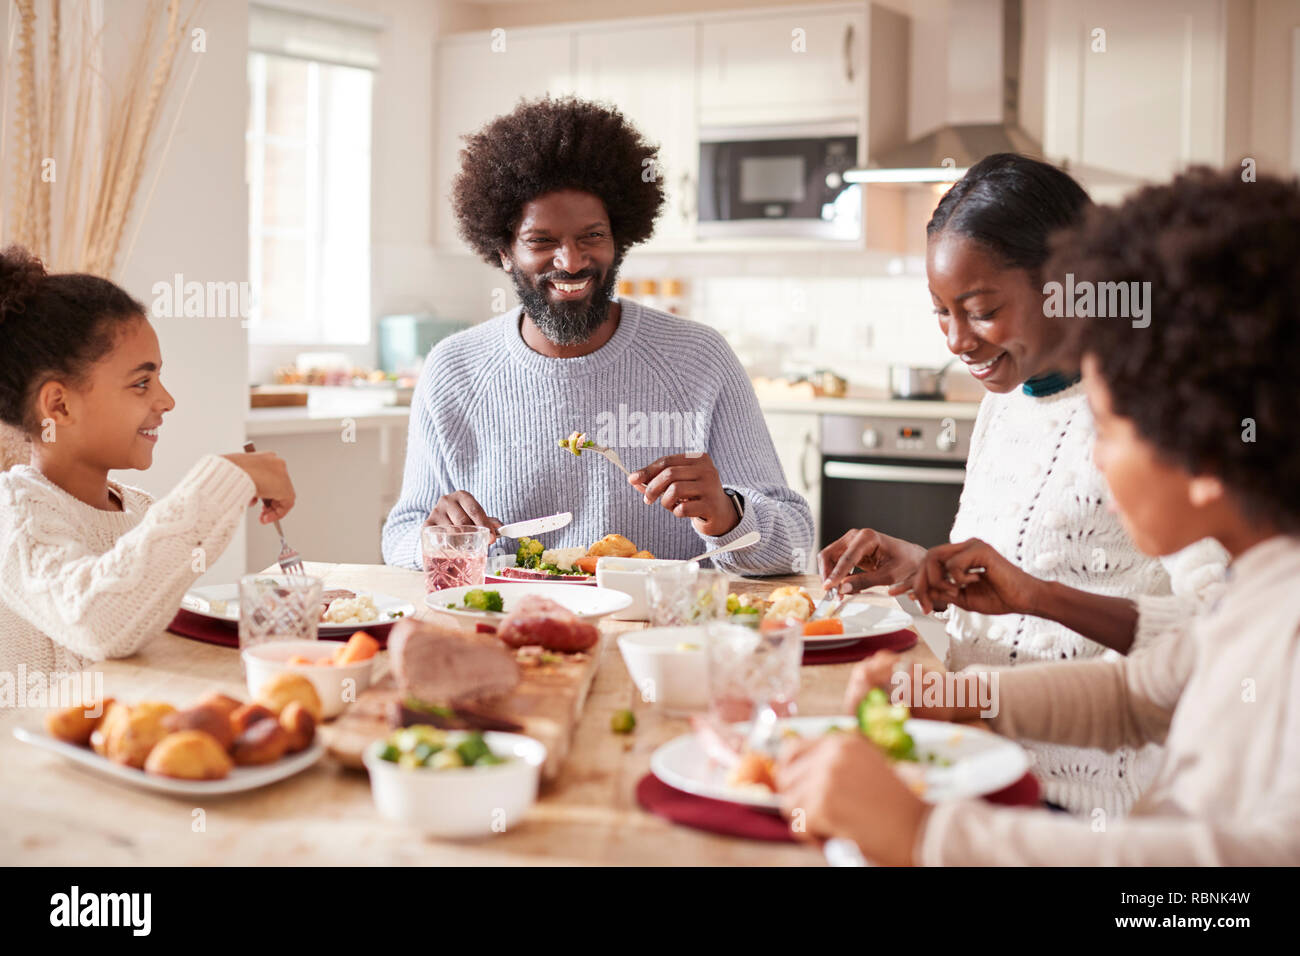 Happy mixed race young family of four eating Sunday dinner together, front view Stock Photo